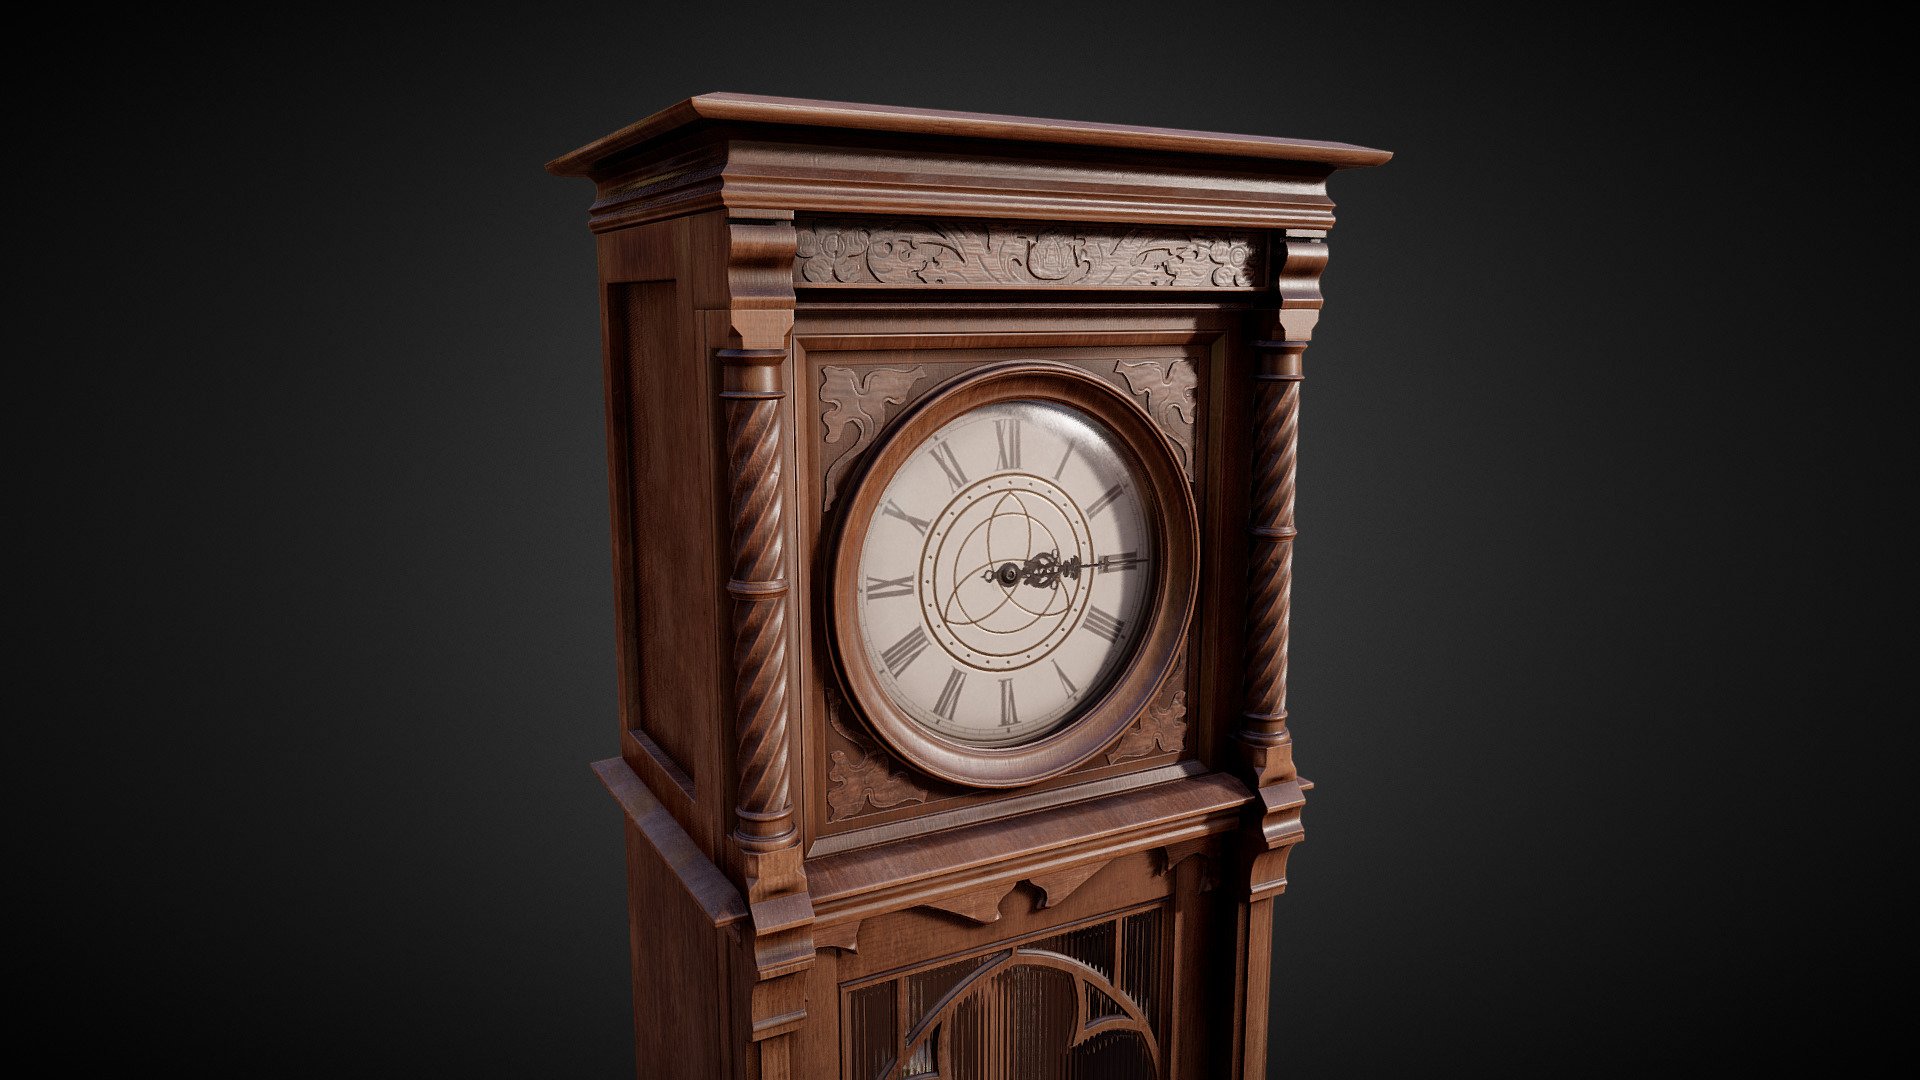 Model of a Grandfather clock.  It will also be included in my Horror Bedroom Asset Pack for UE4.

For more of my work you can look here

Important/Additional Notes: If you encounter problems or have further questions or suggestions you can drop me an email at timgames52@gmail.com or write me a message at Artstation

Technical Details

Texture Sizes:




All Textures are 4096x4096

Vertex Count Combined:  24563 (44824 - Tris)

Format: fbx

LODs included: No

Number of Meshes: 9

Number of Textures: 17

Artstation Post with more images: Link - Grandfather Clock - PBR Model - Buy Royalty Free 3D model by Tim H. (@eueruntergang) 3d model